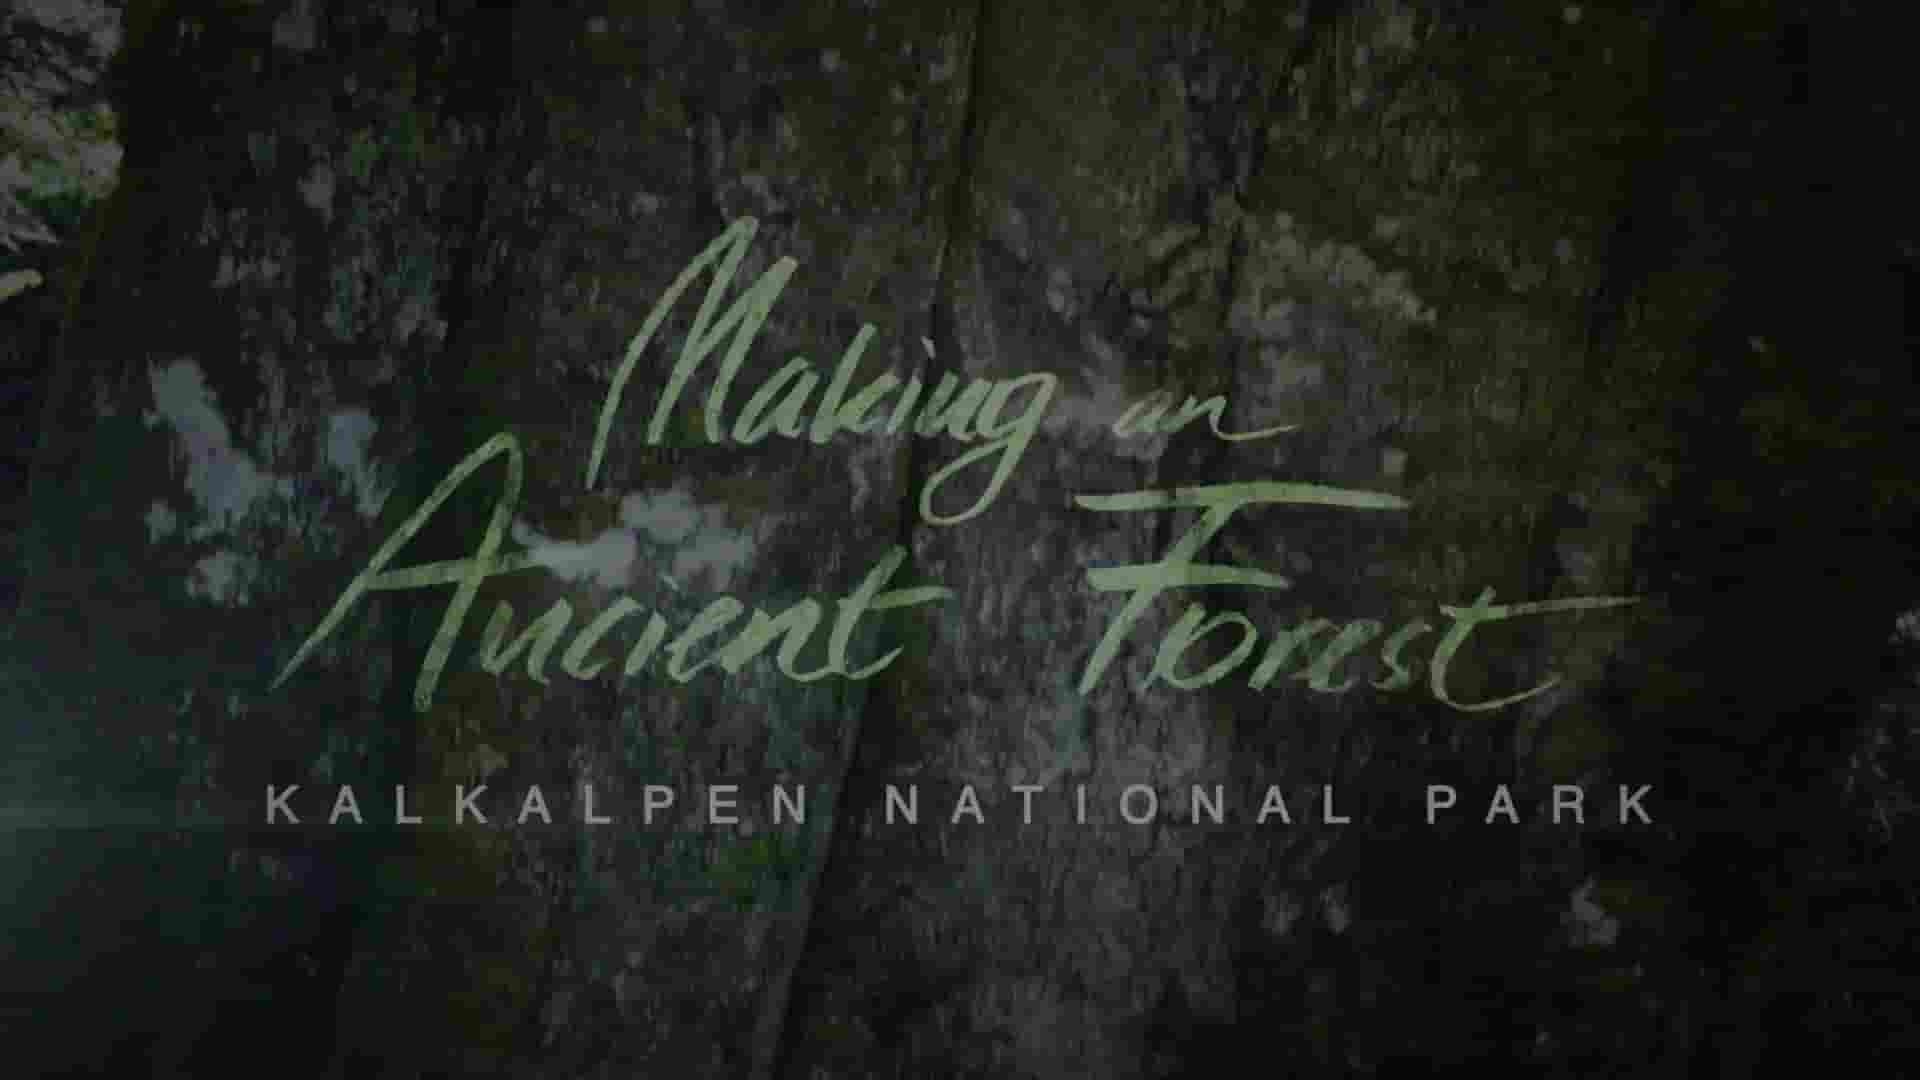 Science Vision纪录片《回归远古森林—Kalkalpen国家公园 Making An Ancient Fores 2017》全1集 英语英字 1080P高清网盘下载